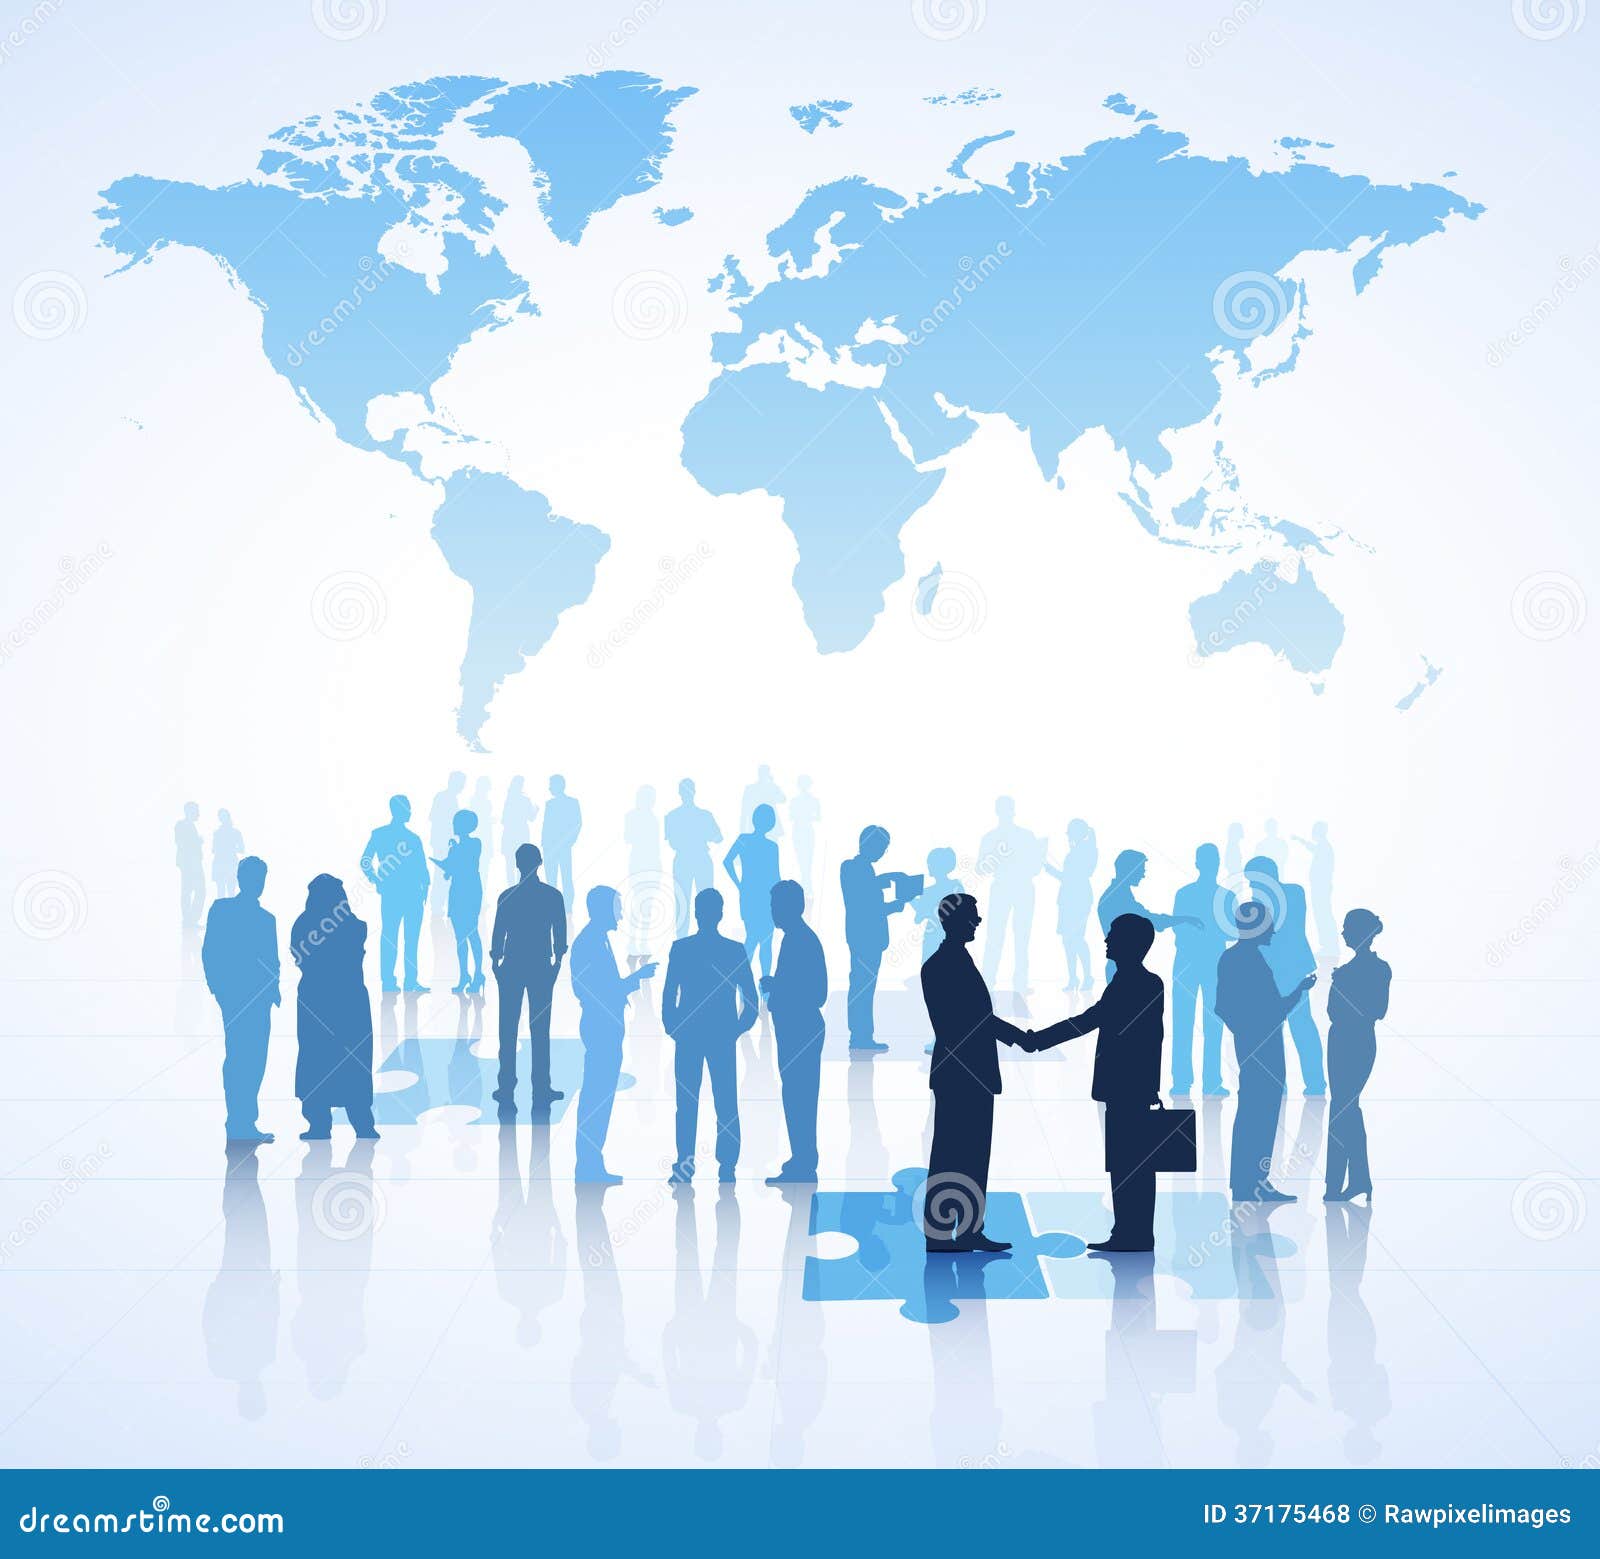 global business agreement 